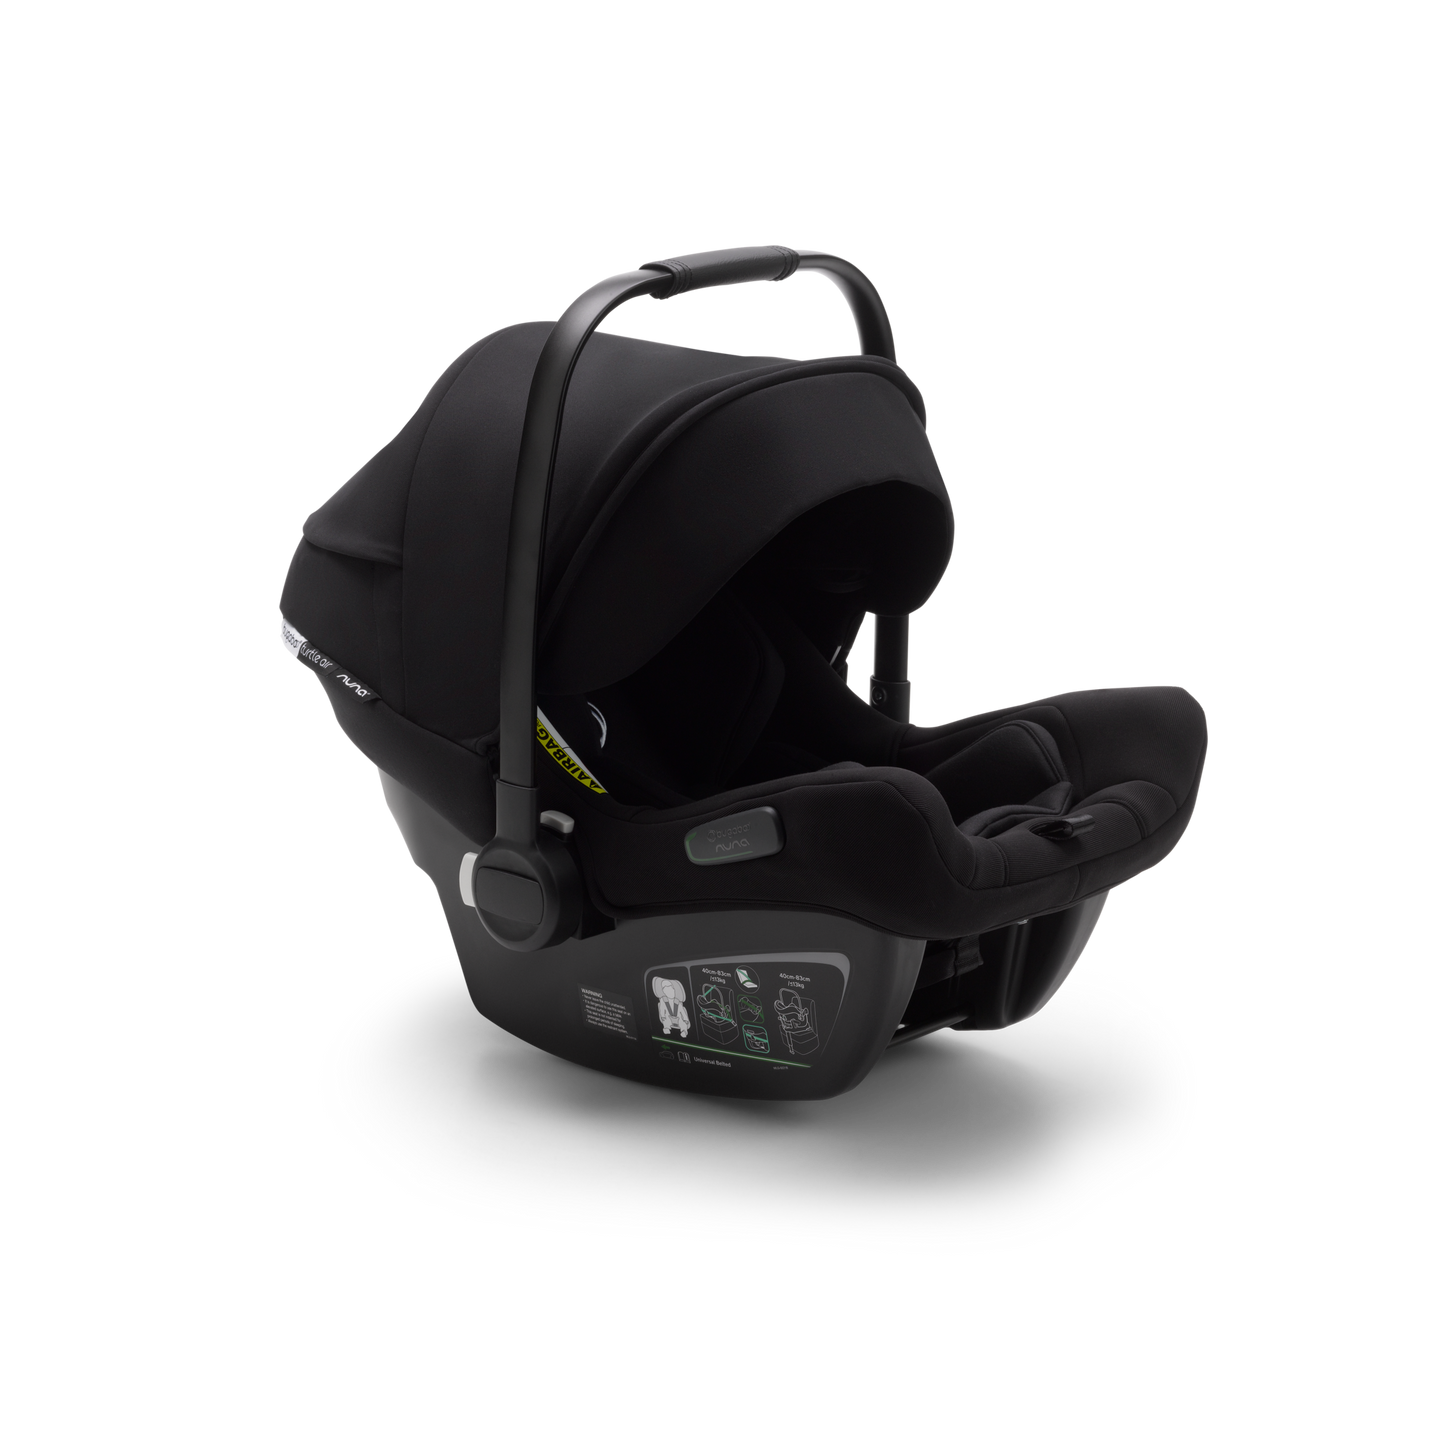 Bugaboo Donkey 5 Twin Pushchair & Turtle Air 360 Travel System - Graphite / Stormy Blue